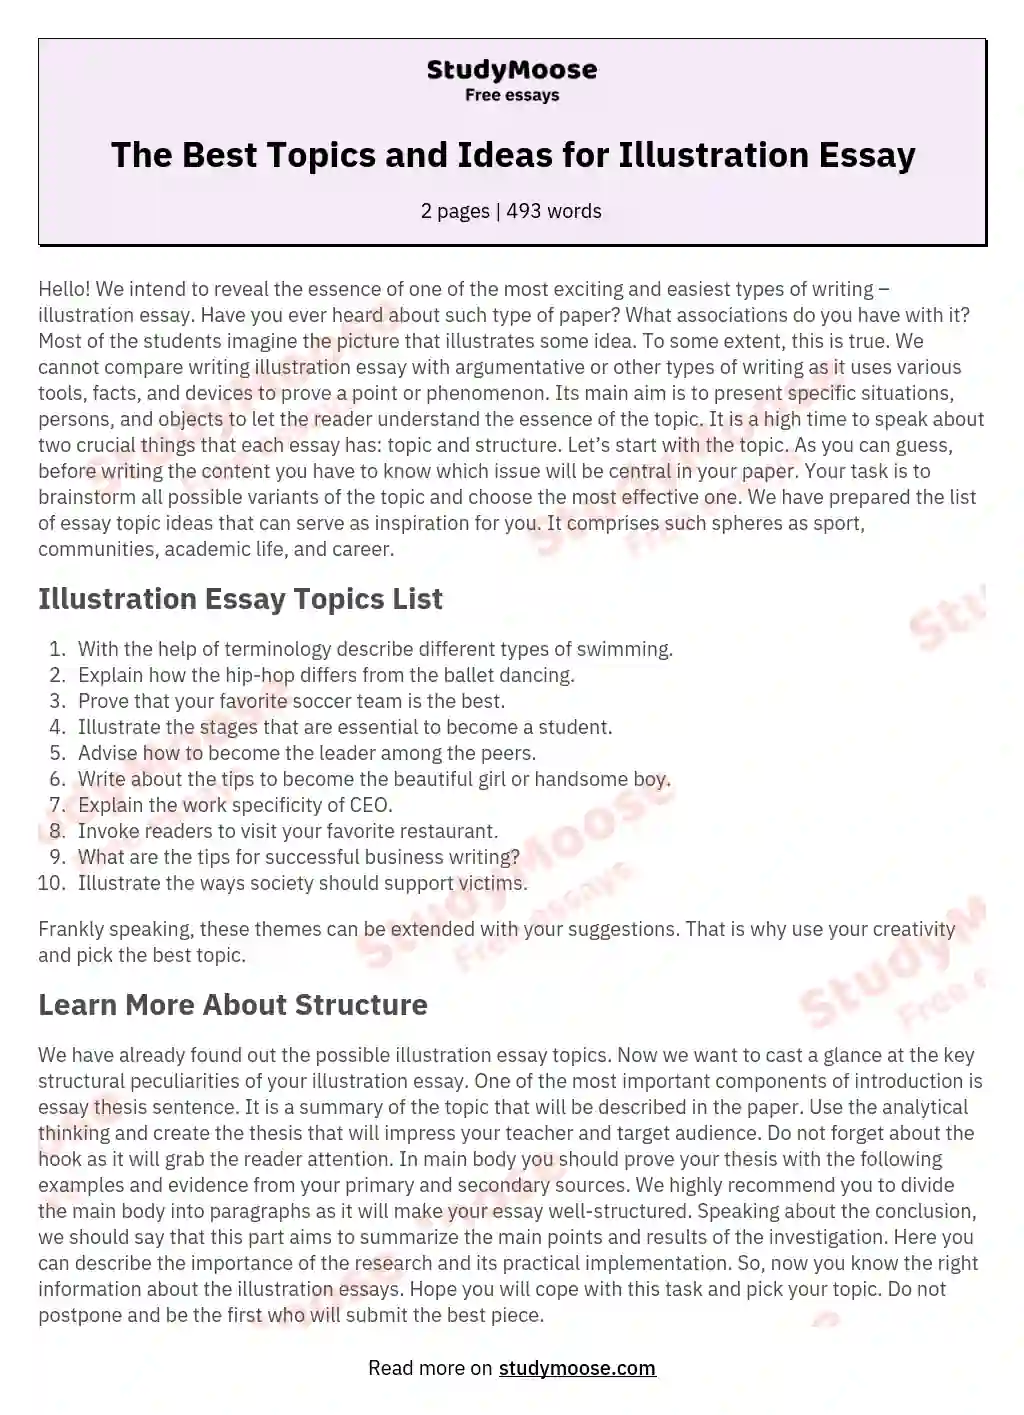 The Best Topics and Ideas for Illustration Essay essay